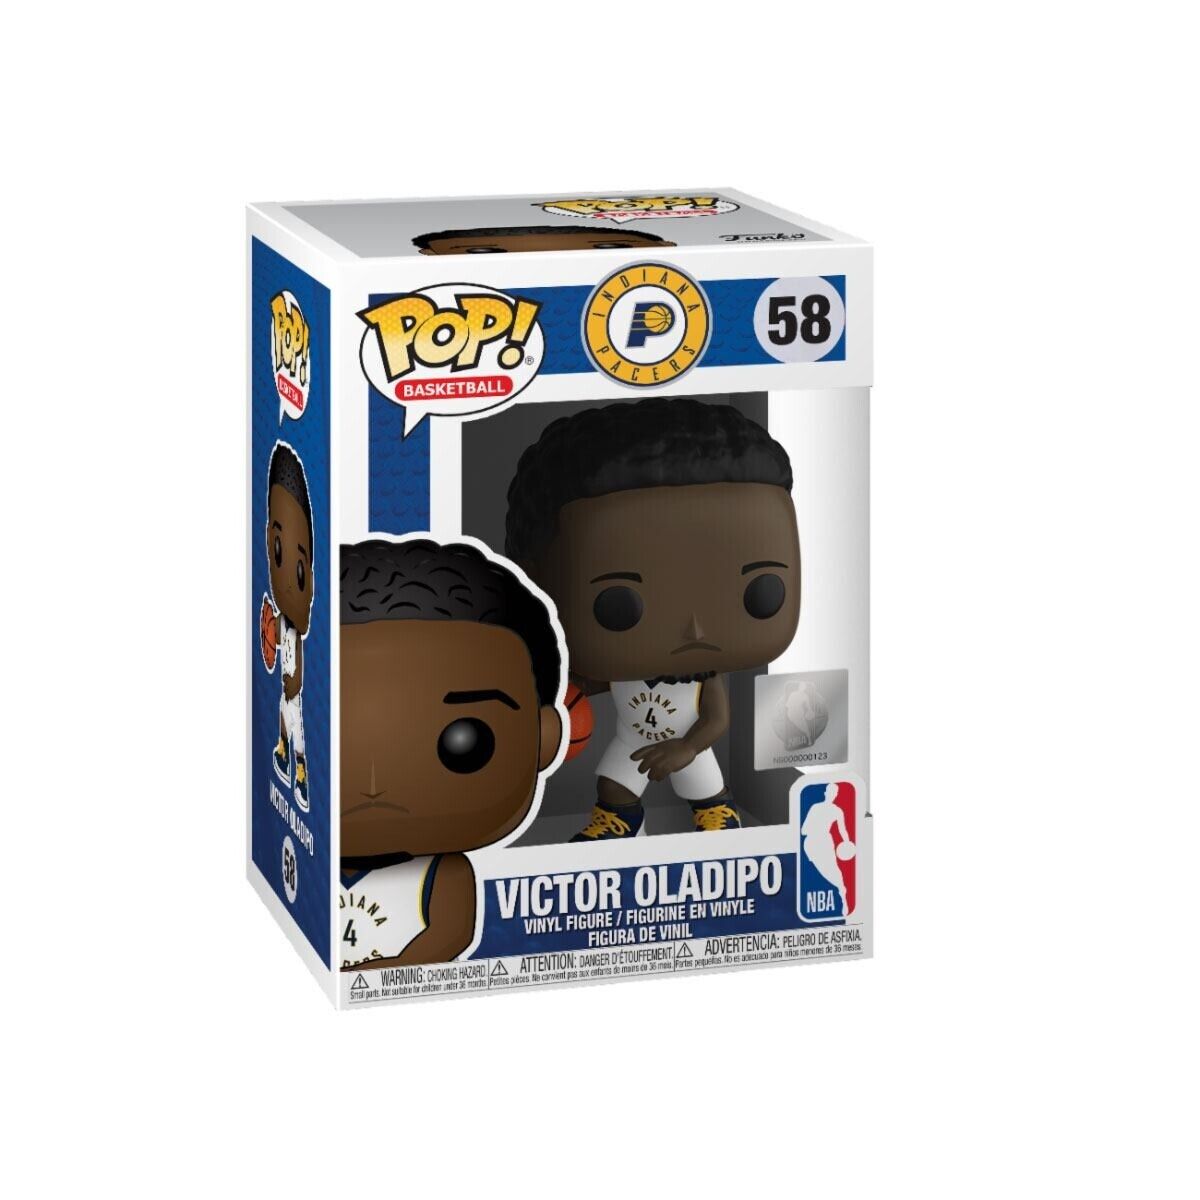 *IN HAND* Funko Pop Basketball: Indiana Pacers - Victor Oladipo #58